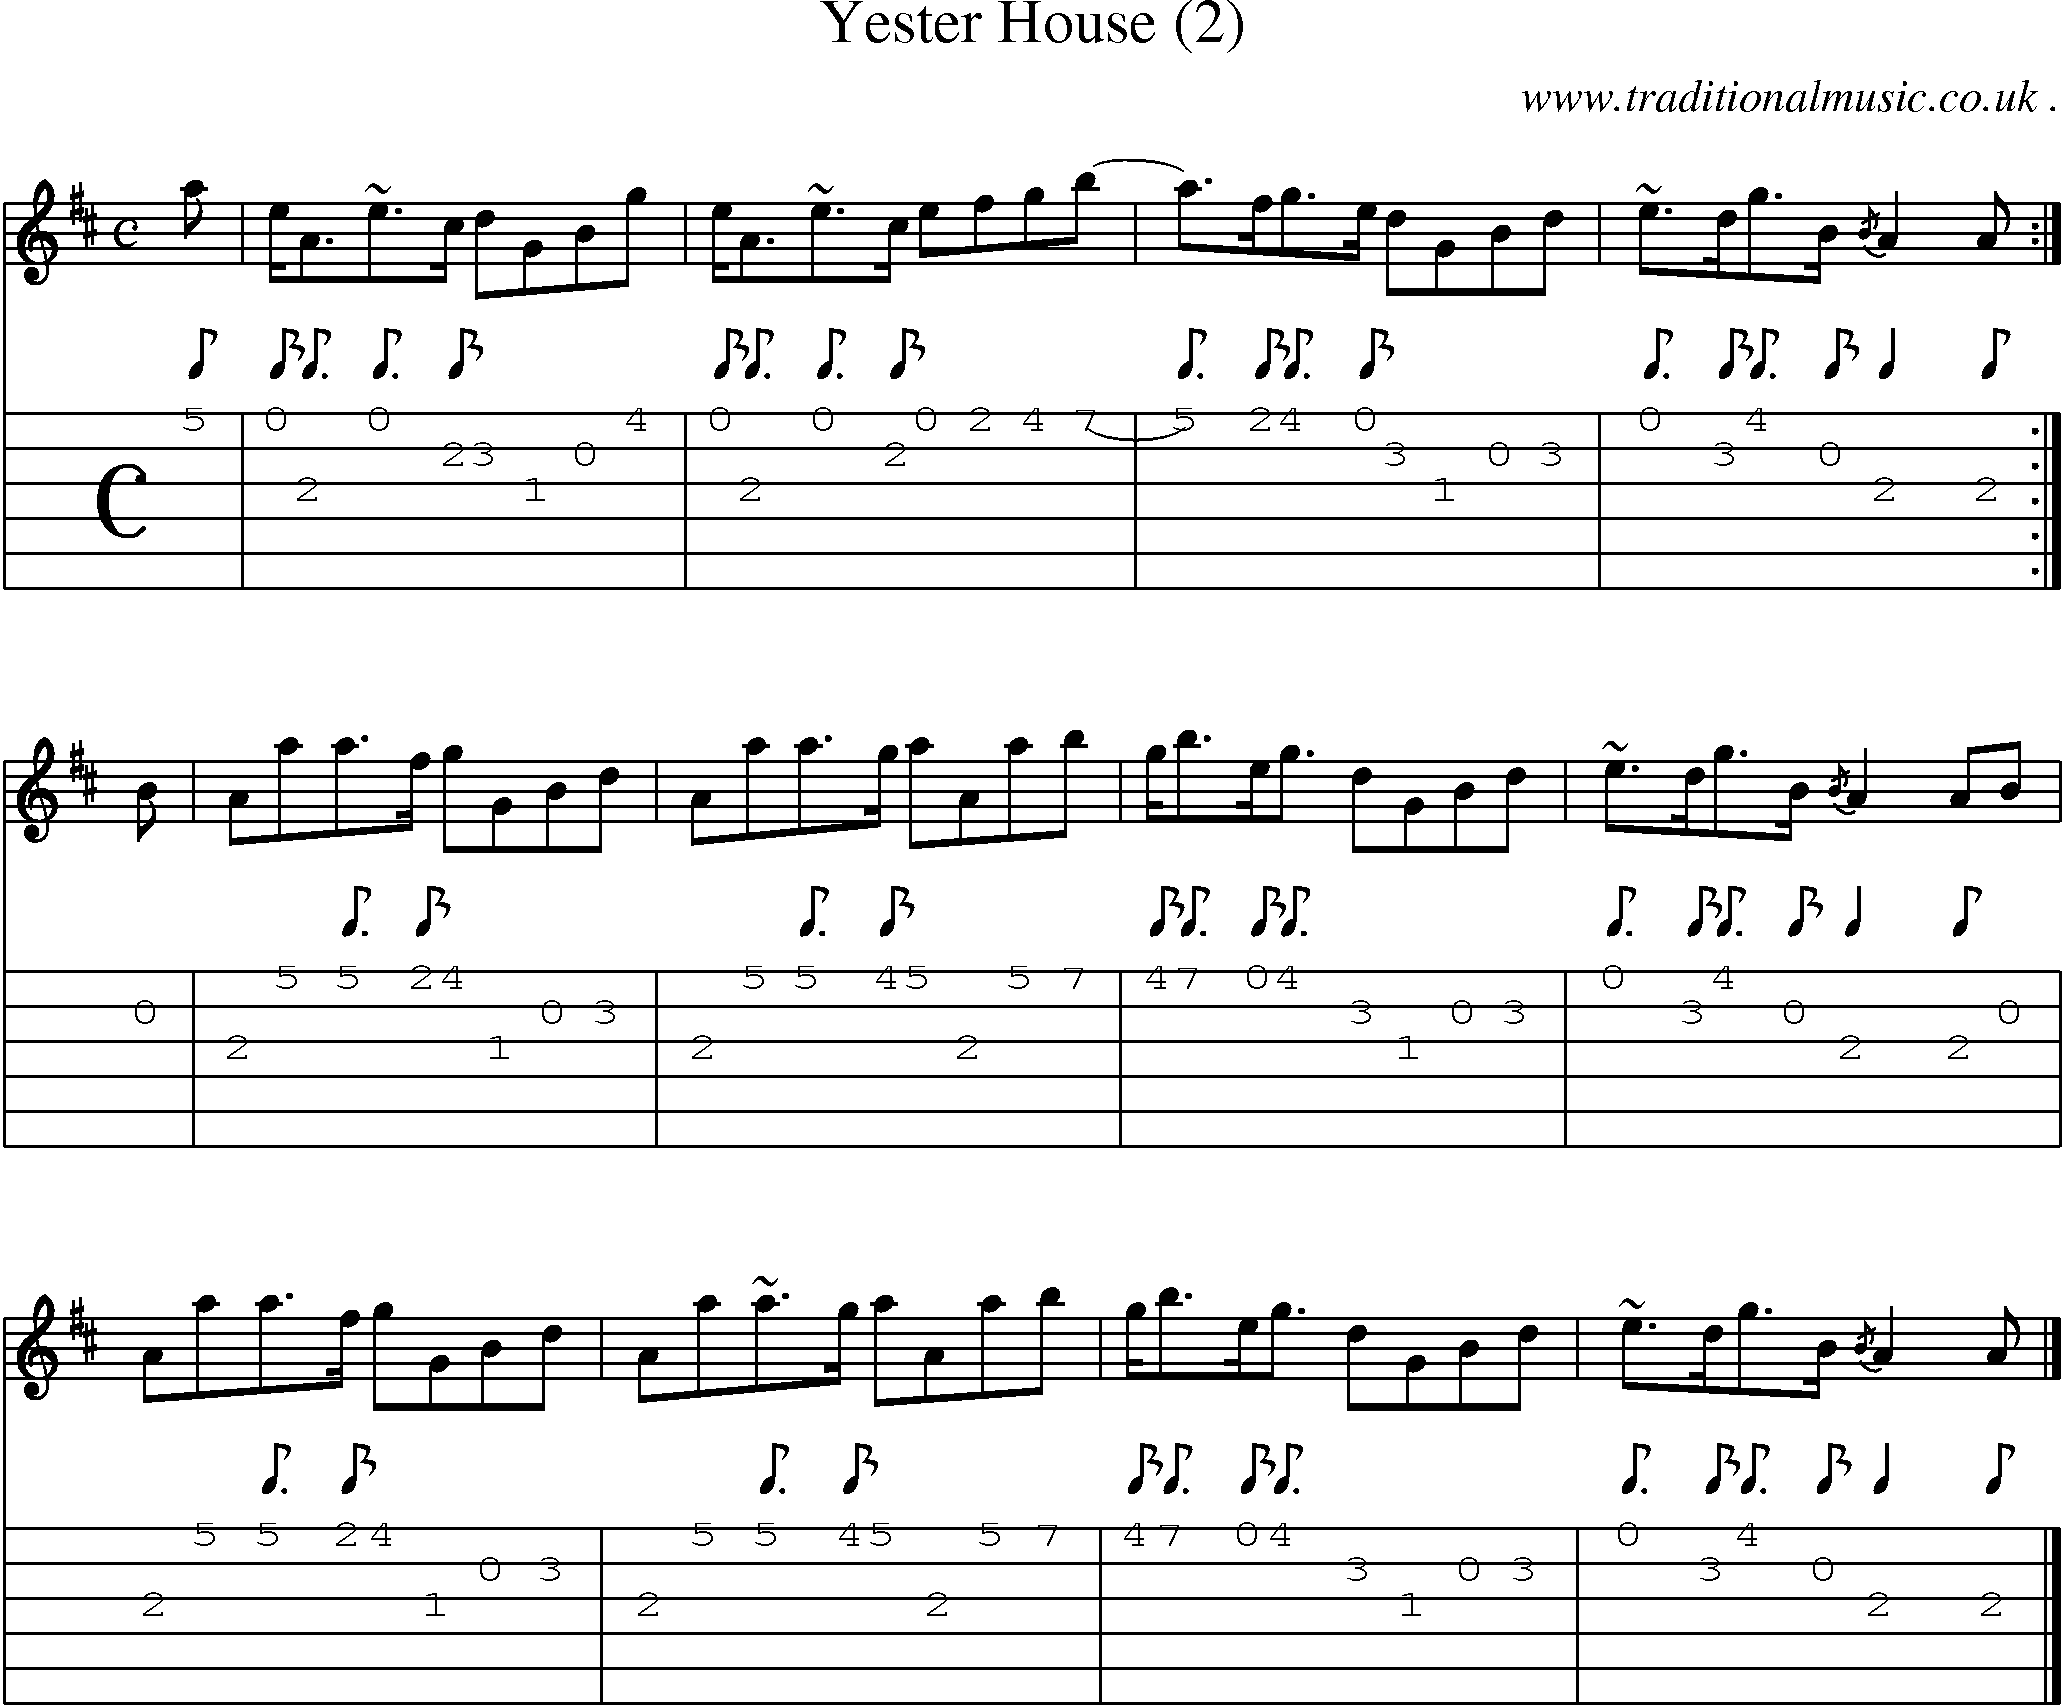 Sheet-music  score, Chords and Guitar Tabs for Yester House 2